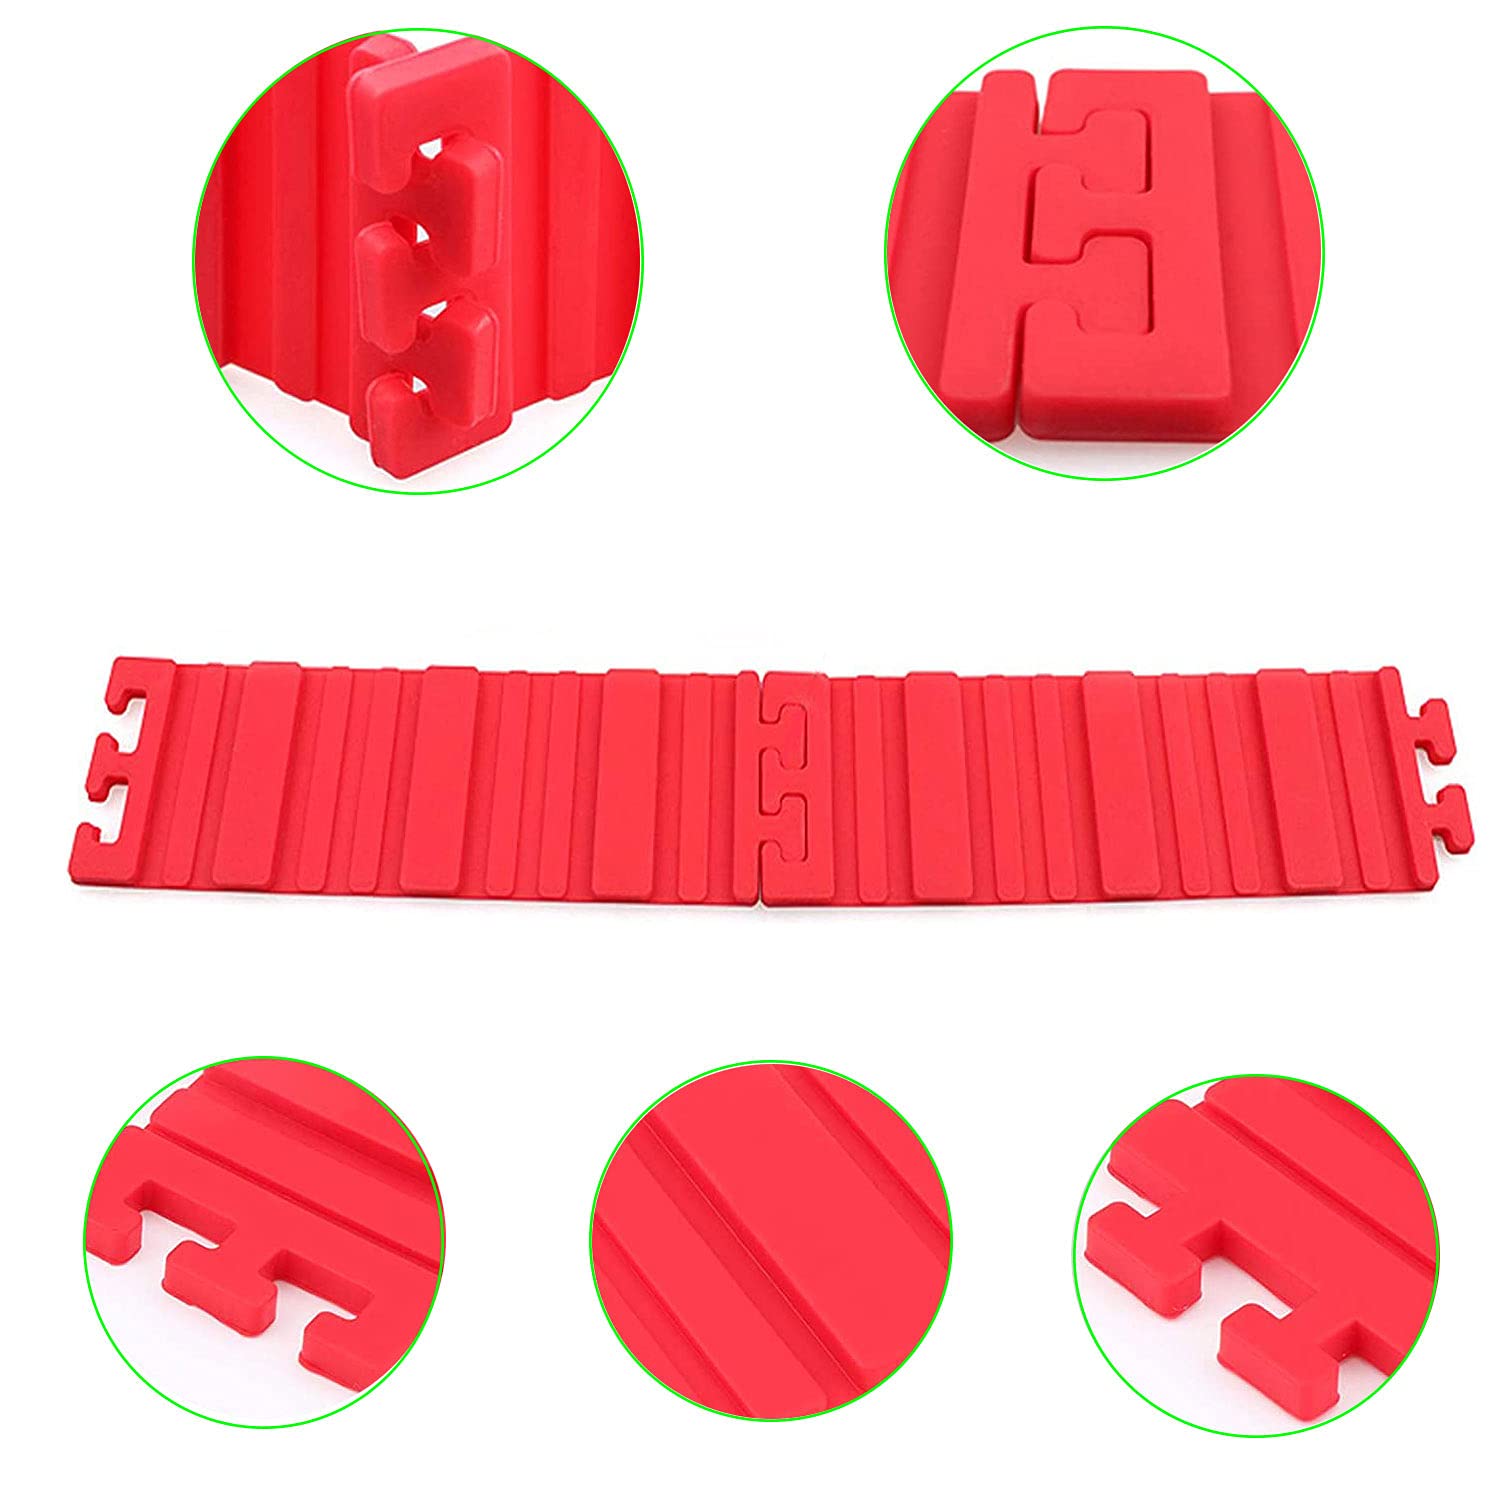 12 PCS Silicone Cake Mold Magic DIY Bake Snakes Mould Shape Tools for Various Dessert,Design Your Cakes in Any Shape